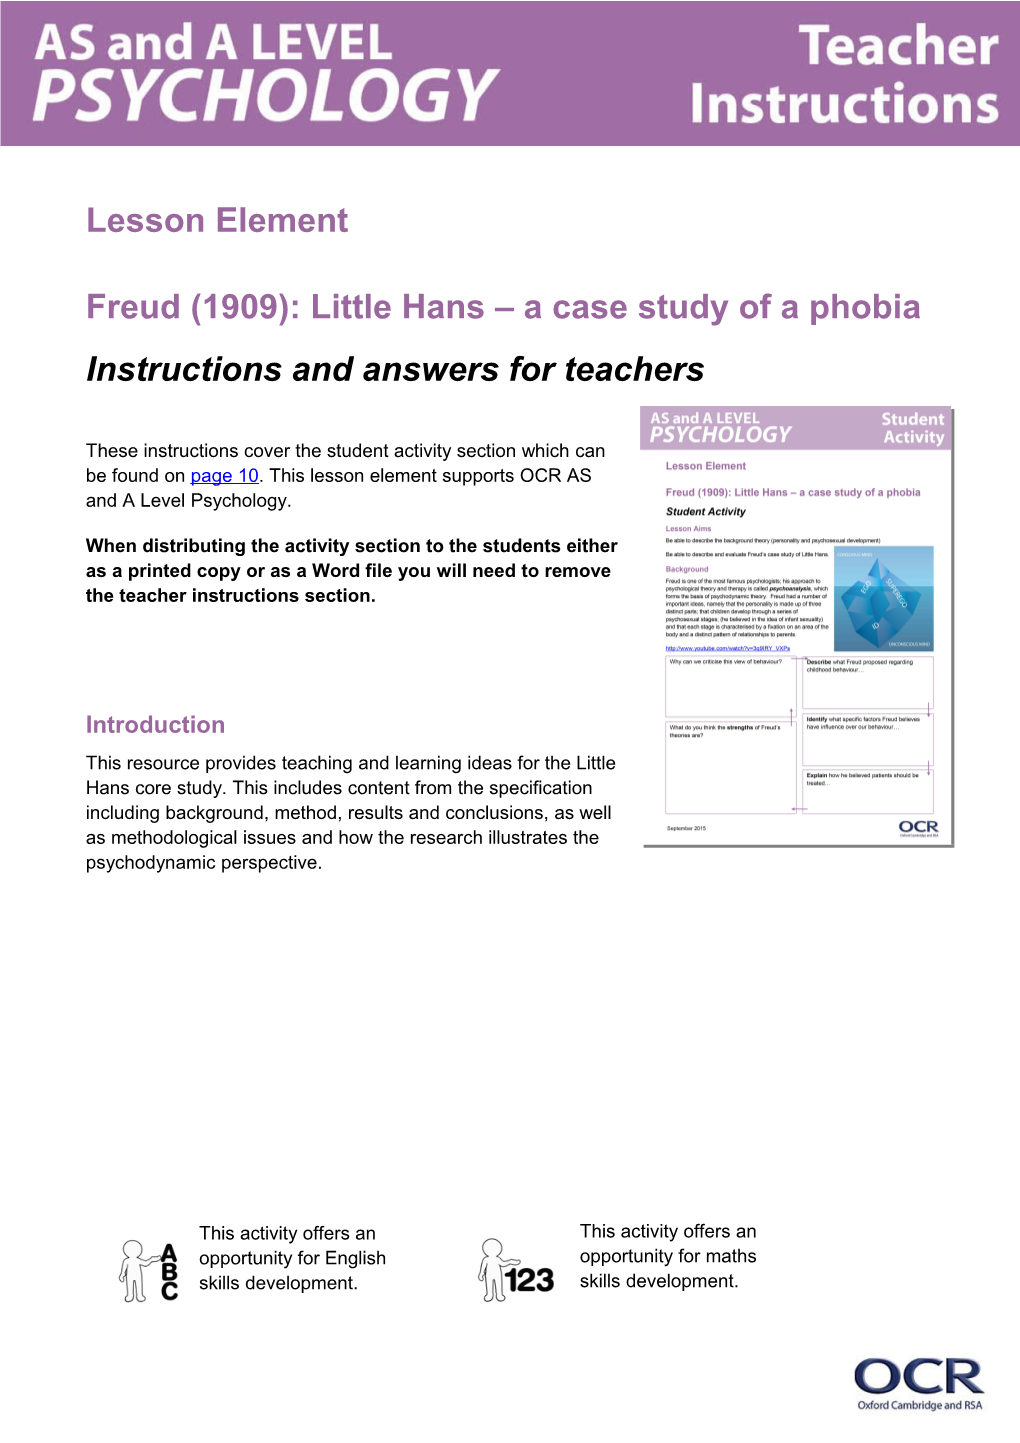 AS and a Level Psychology Lesson Element (Freud (1909): Little Hans a Case Study of a Phobia)